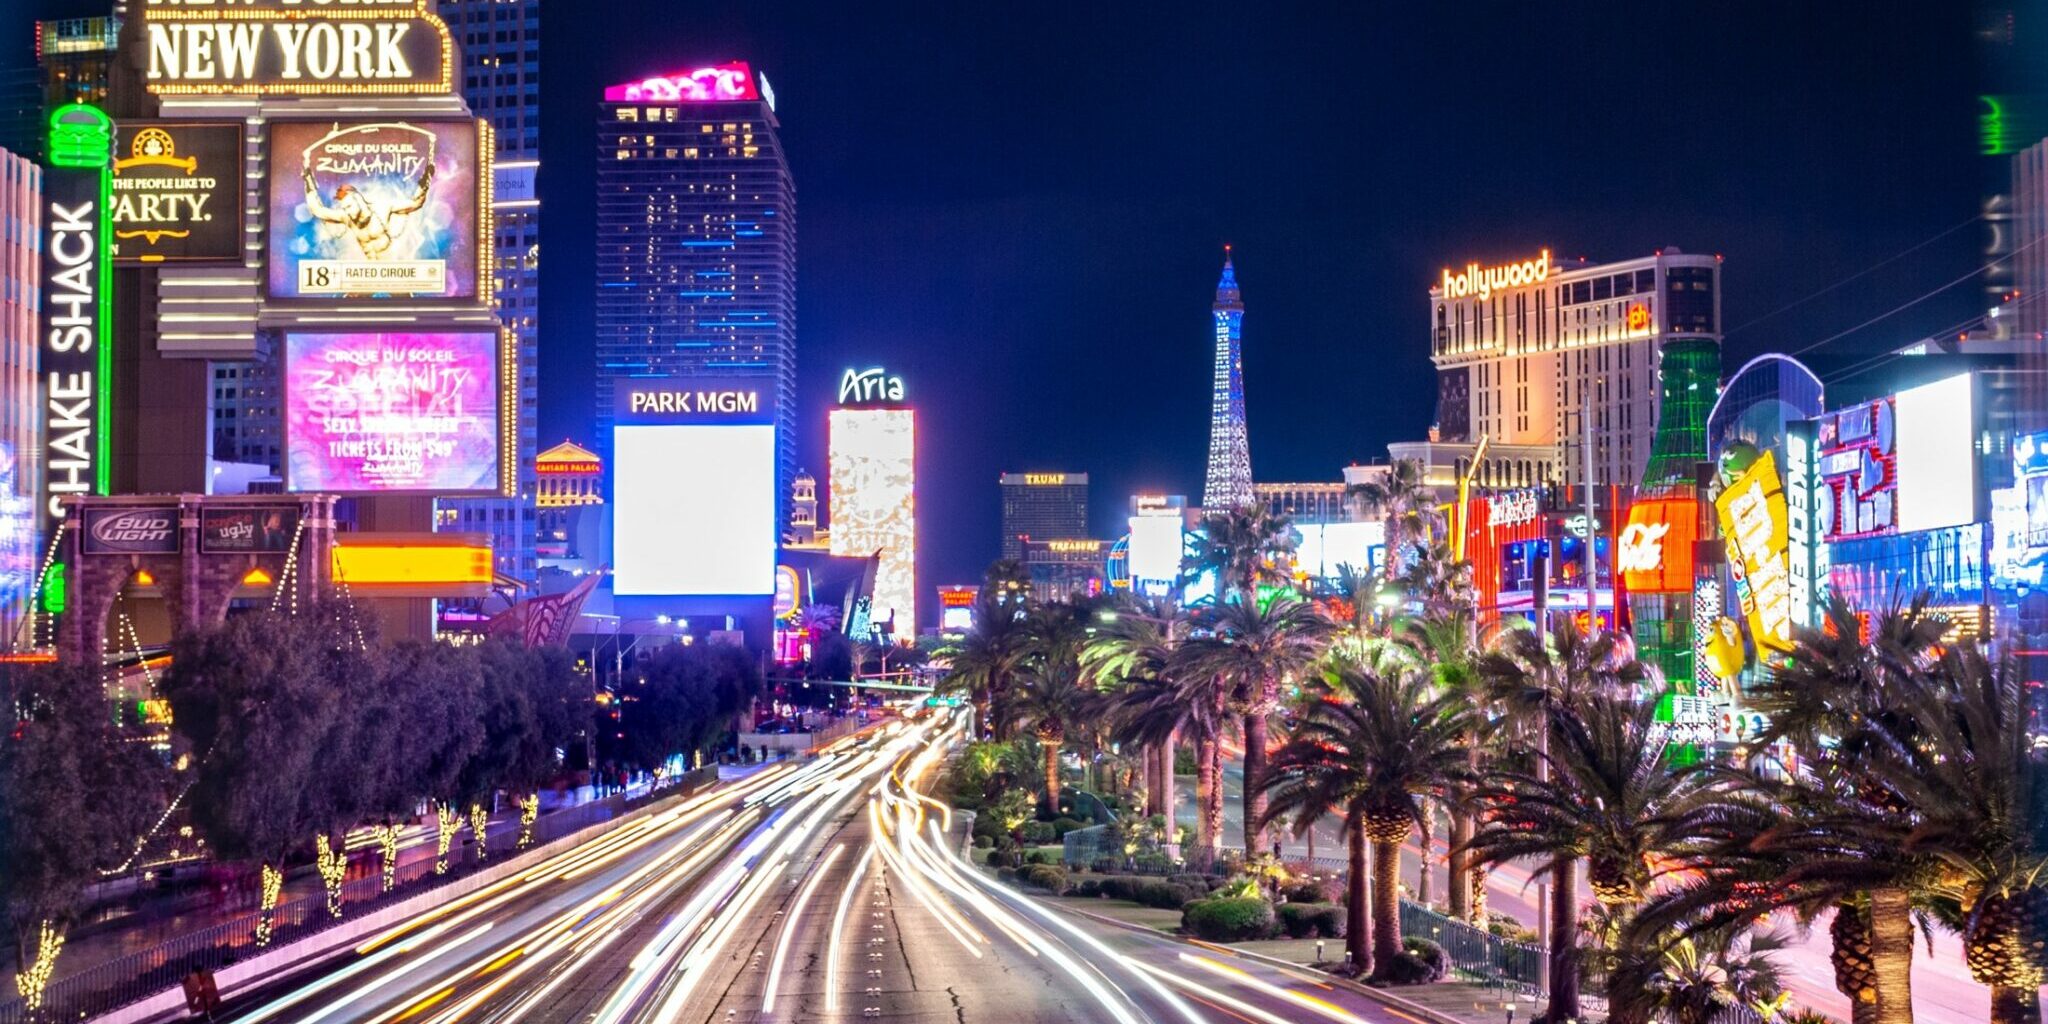 Bright lights and signs over the Las Vegas strip